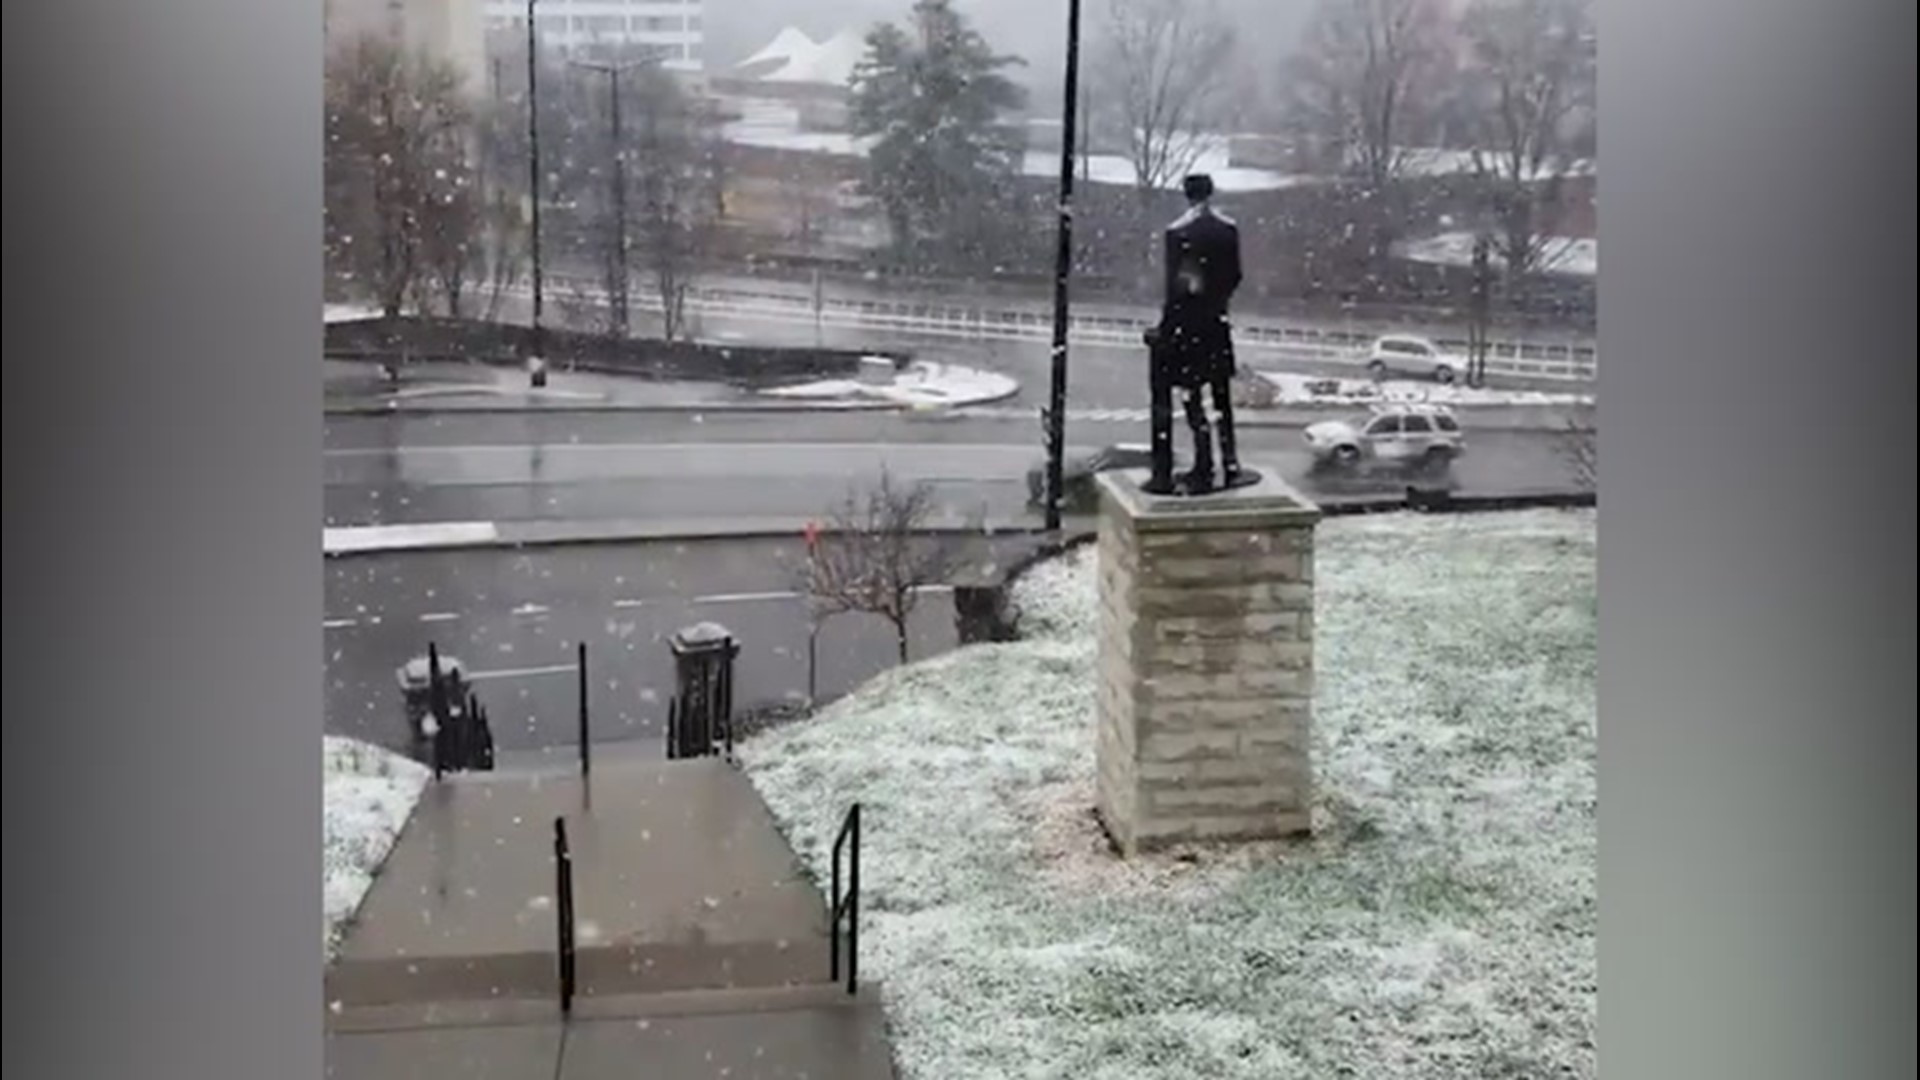 On Feb. 20, heavy snow hit Lincoln Memorial University in Knoxville, Tennessee, blanketing the campus in white.